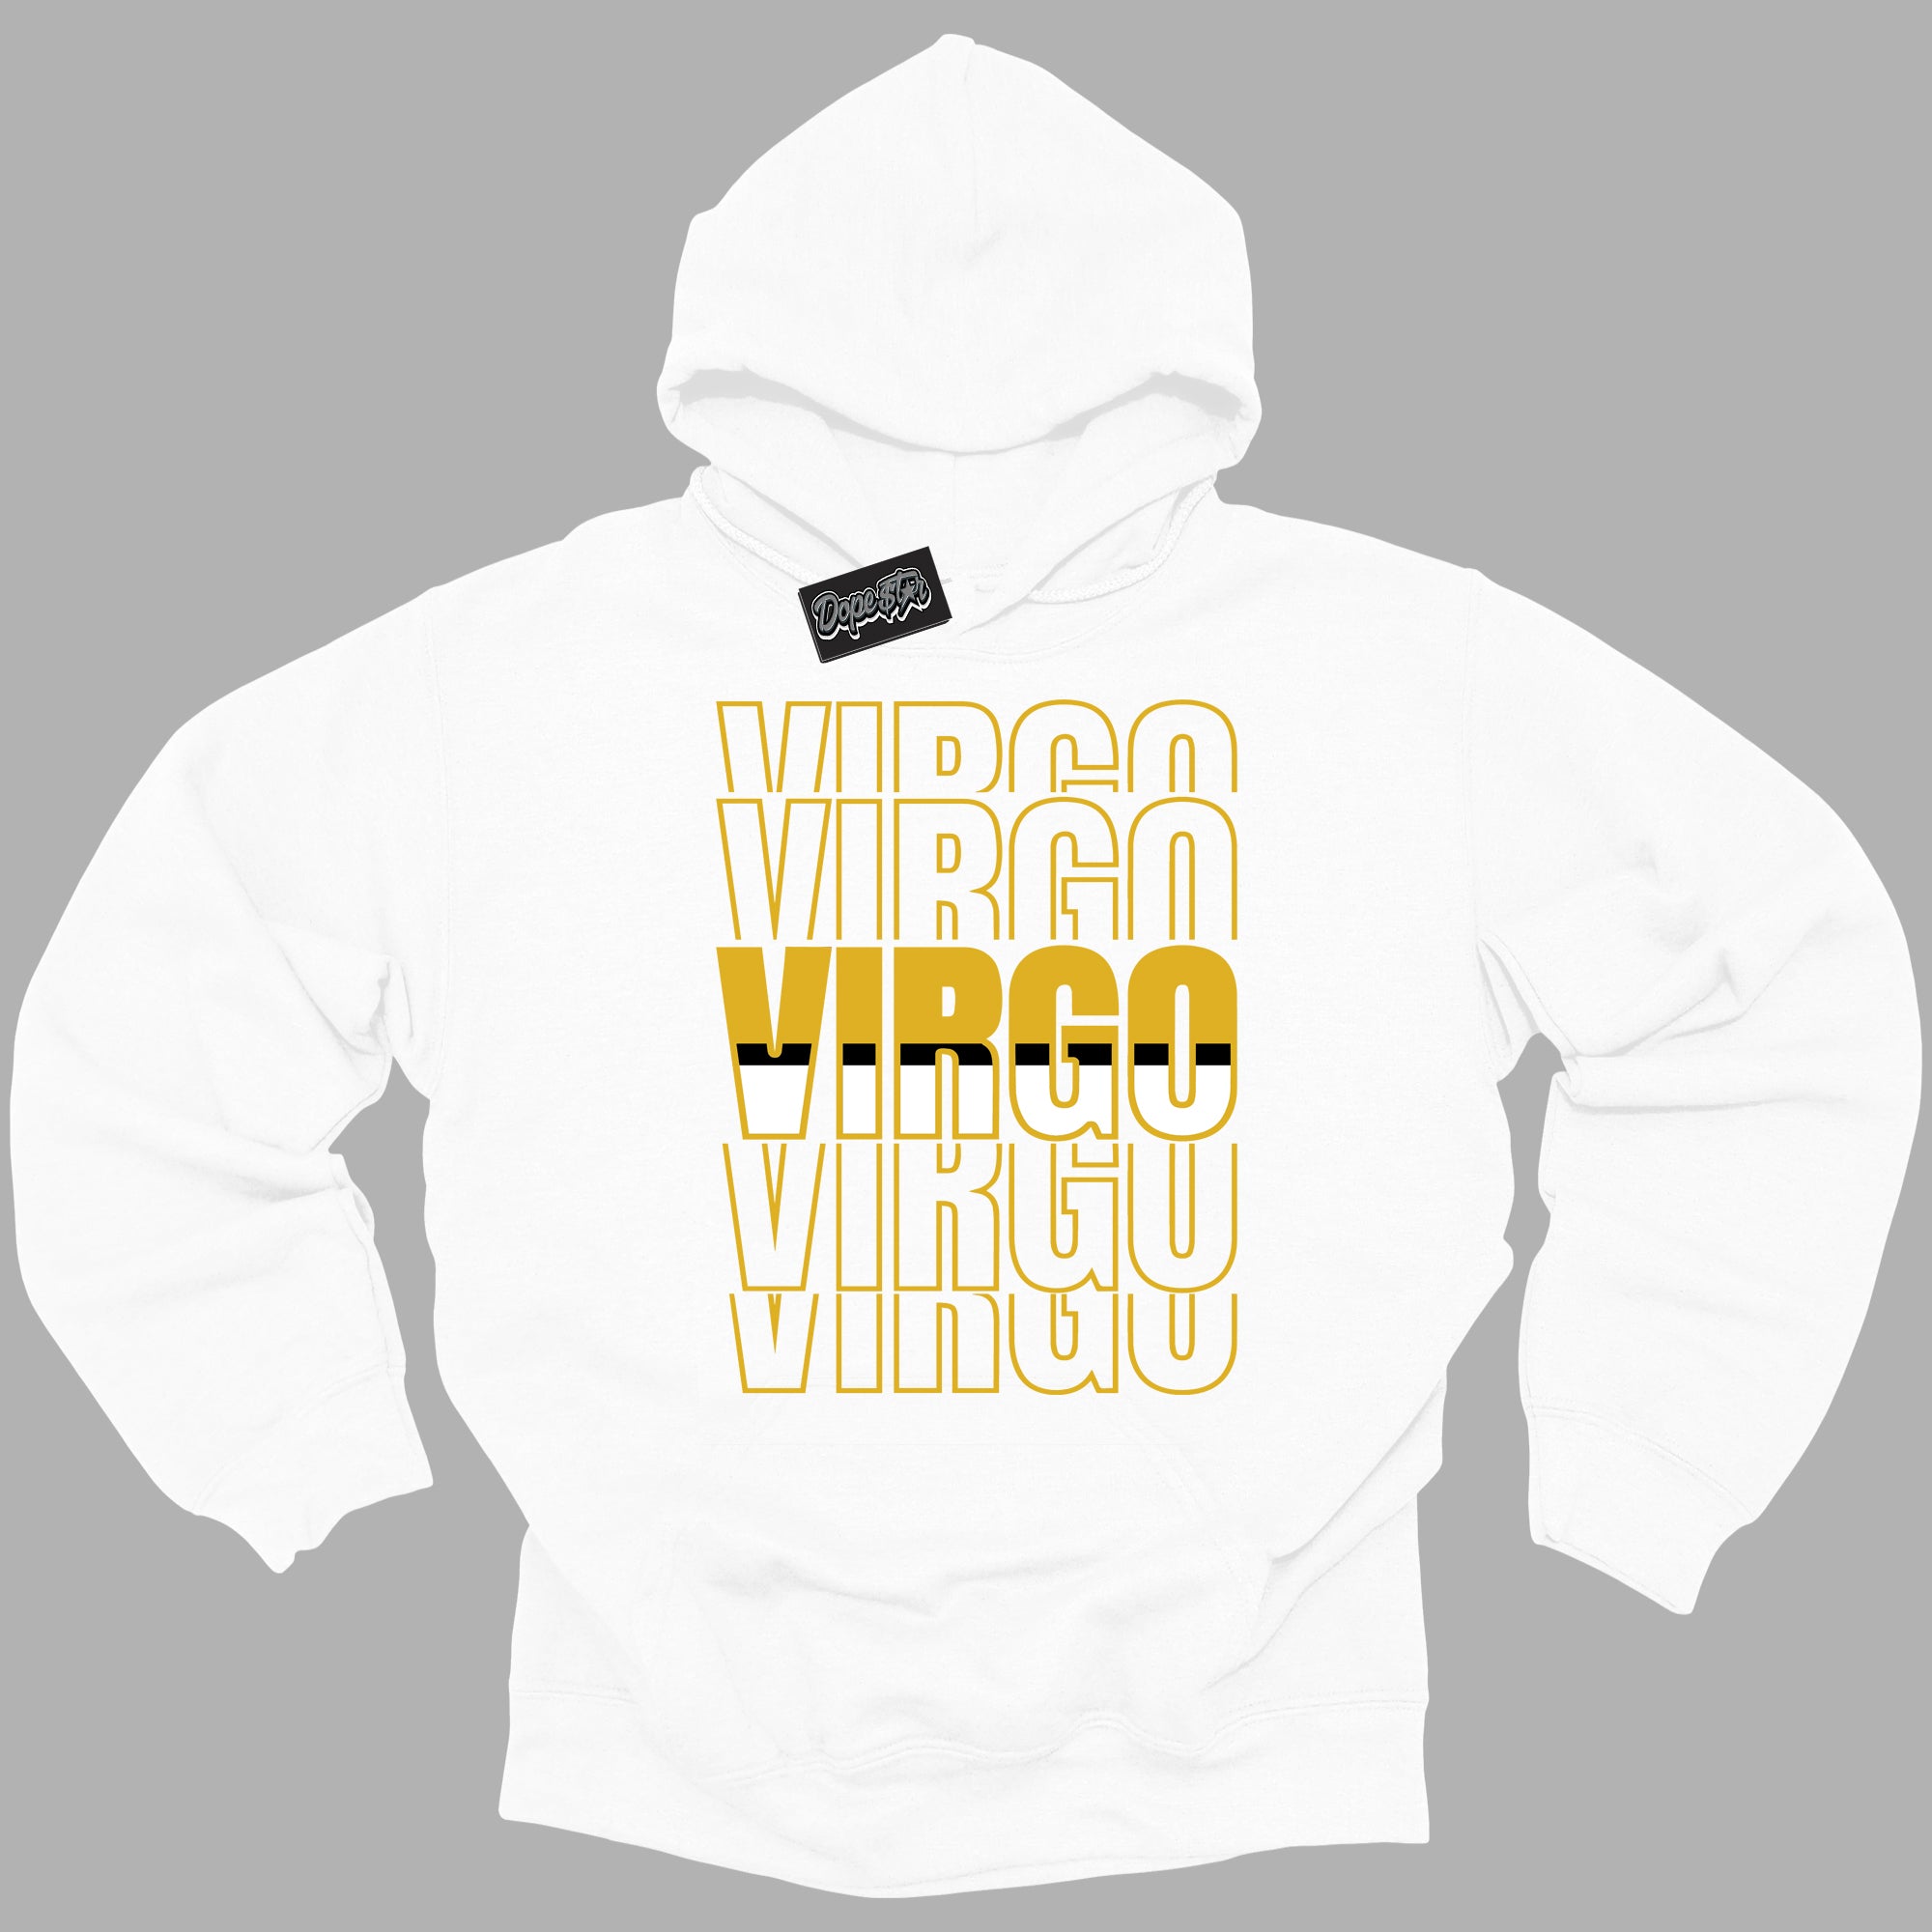 Cool White Hoodie with “Virgo ”  design that Perfectly Matches Yellow Ochre 6s Sneakers.